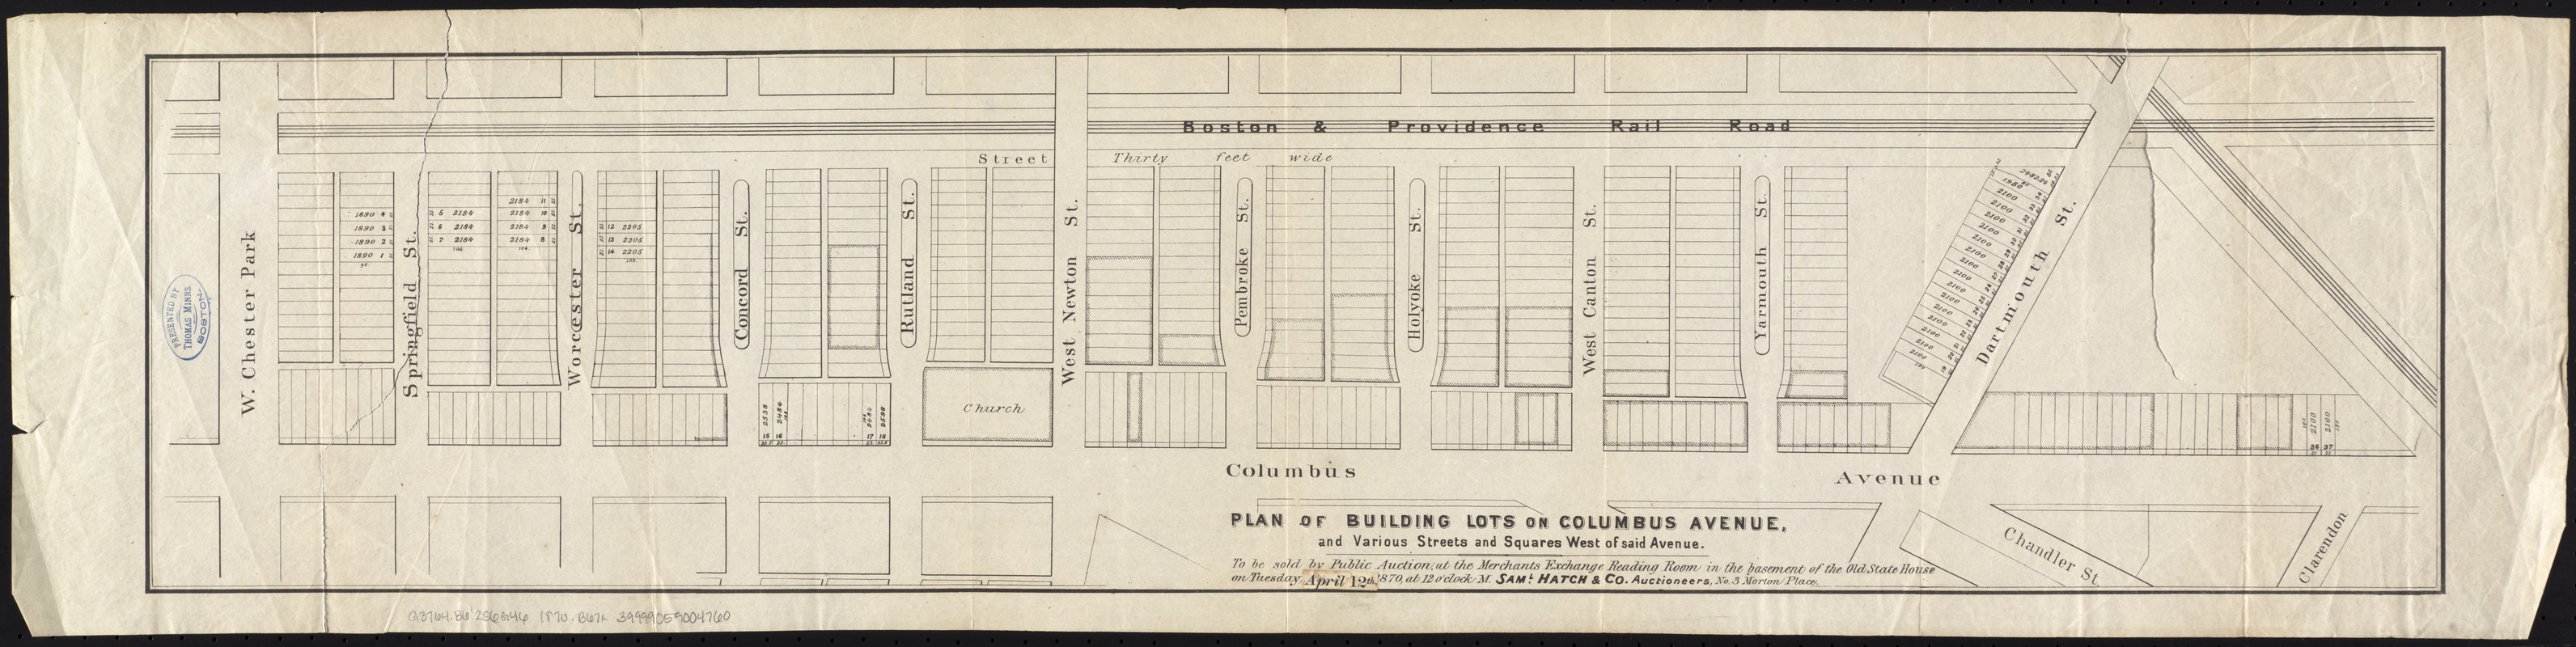 Plan of building lots on Columbus Avenue, and various streets and squares west of said avenue